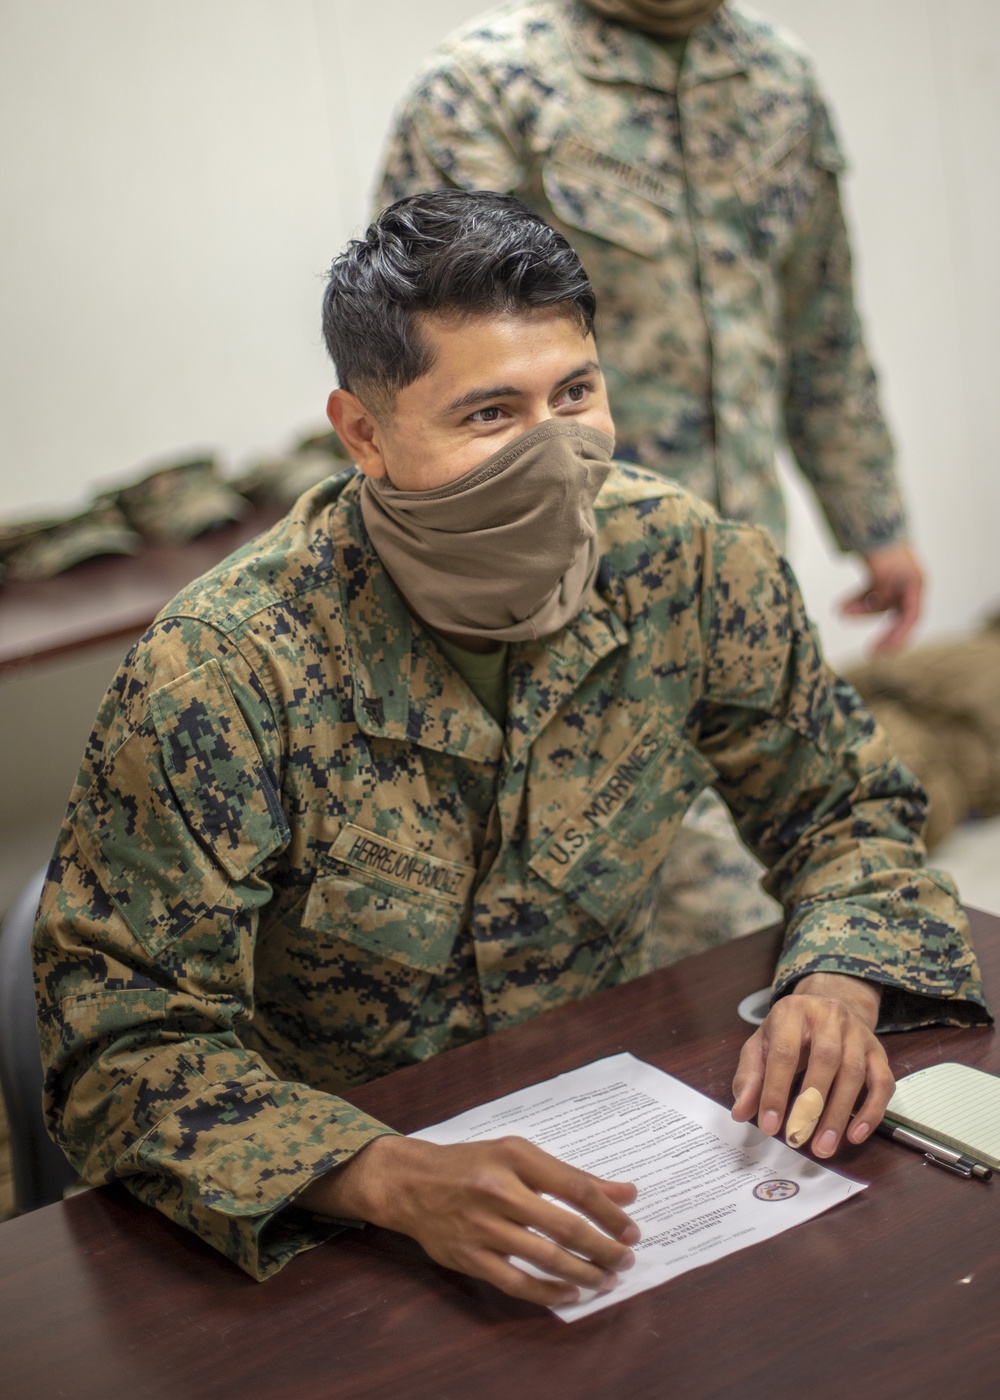 Task force Marines conduct certification exercise prior to Latin America deployment